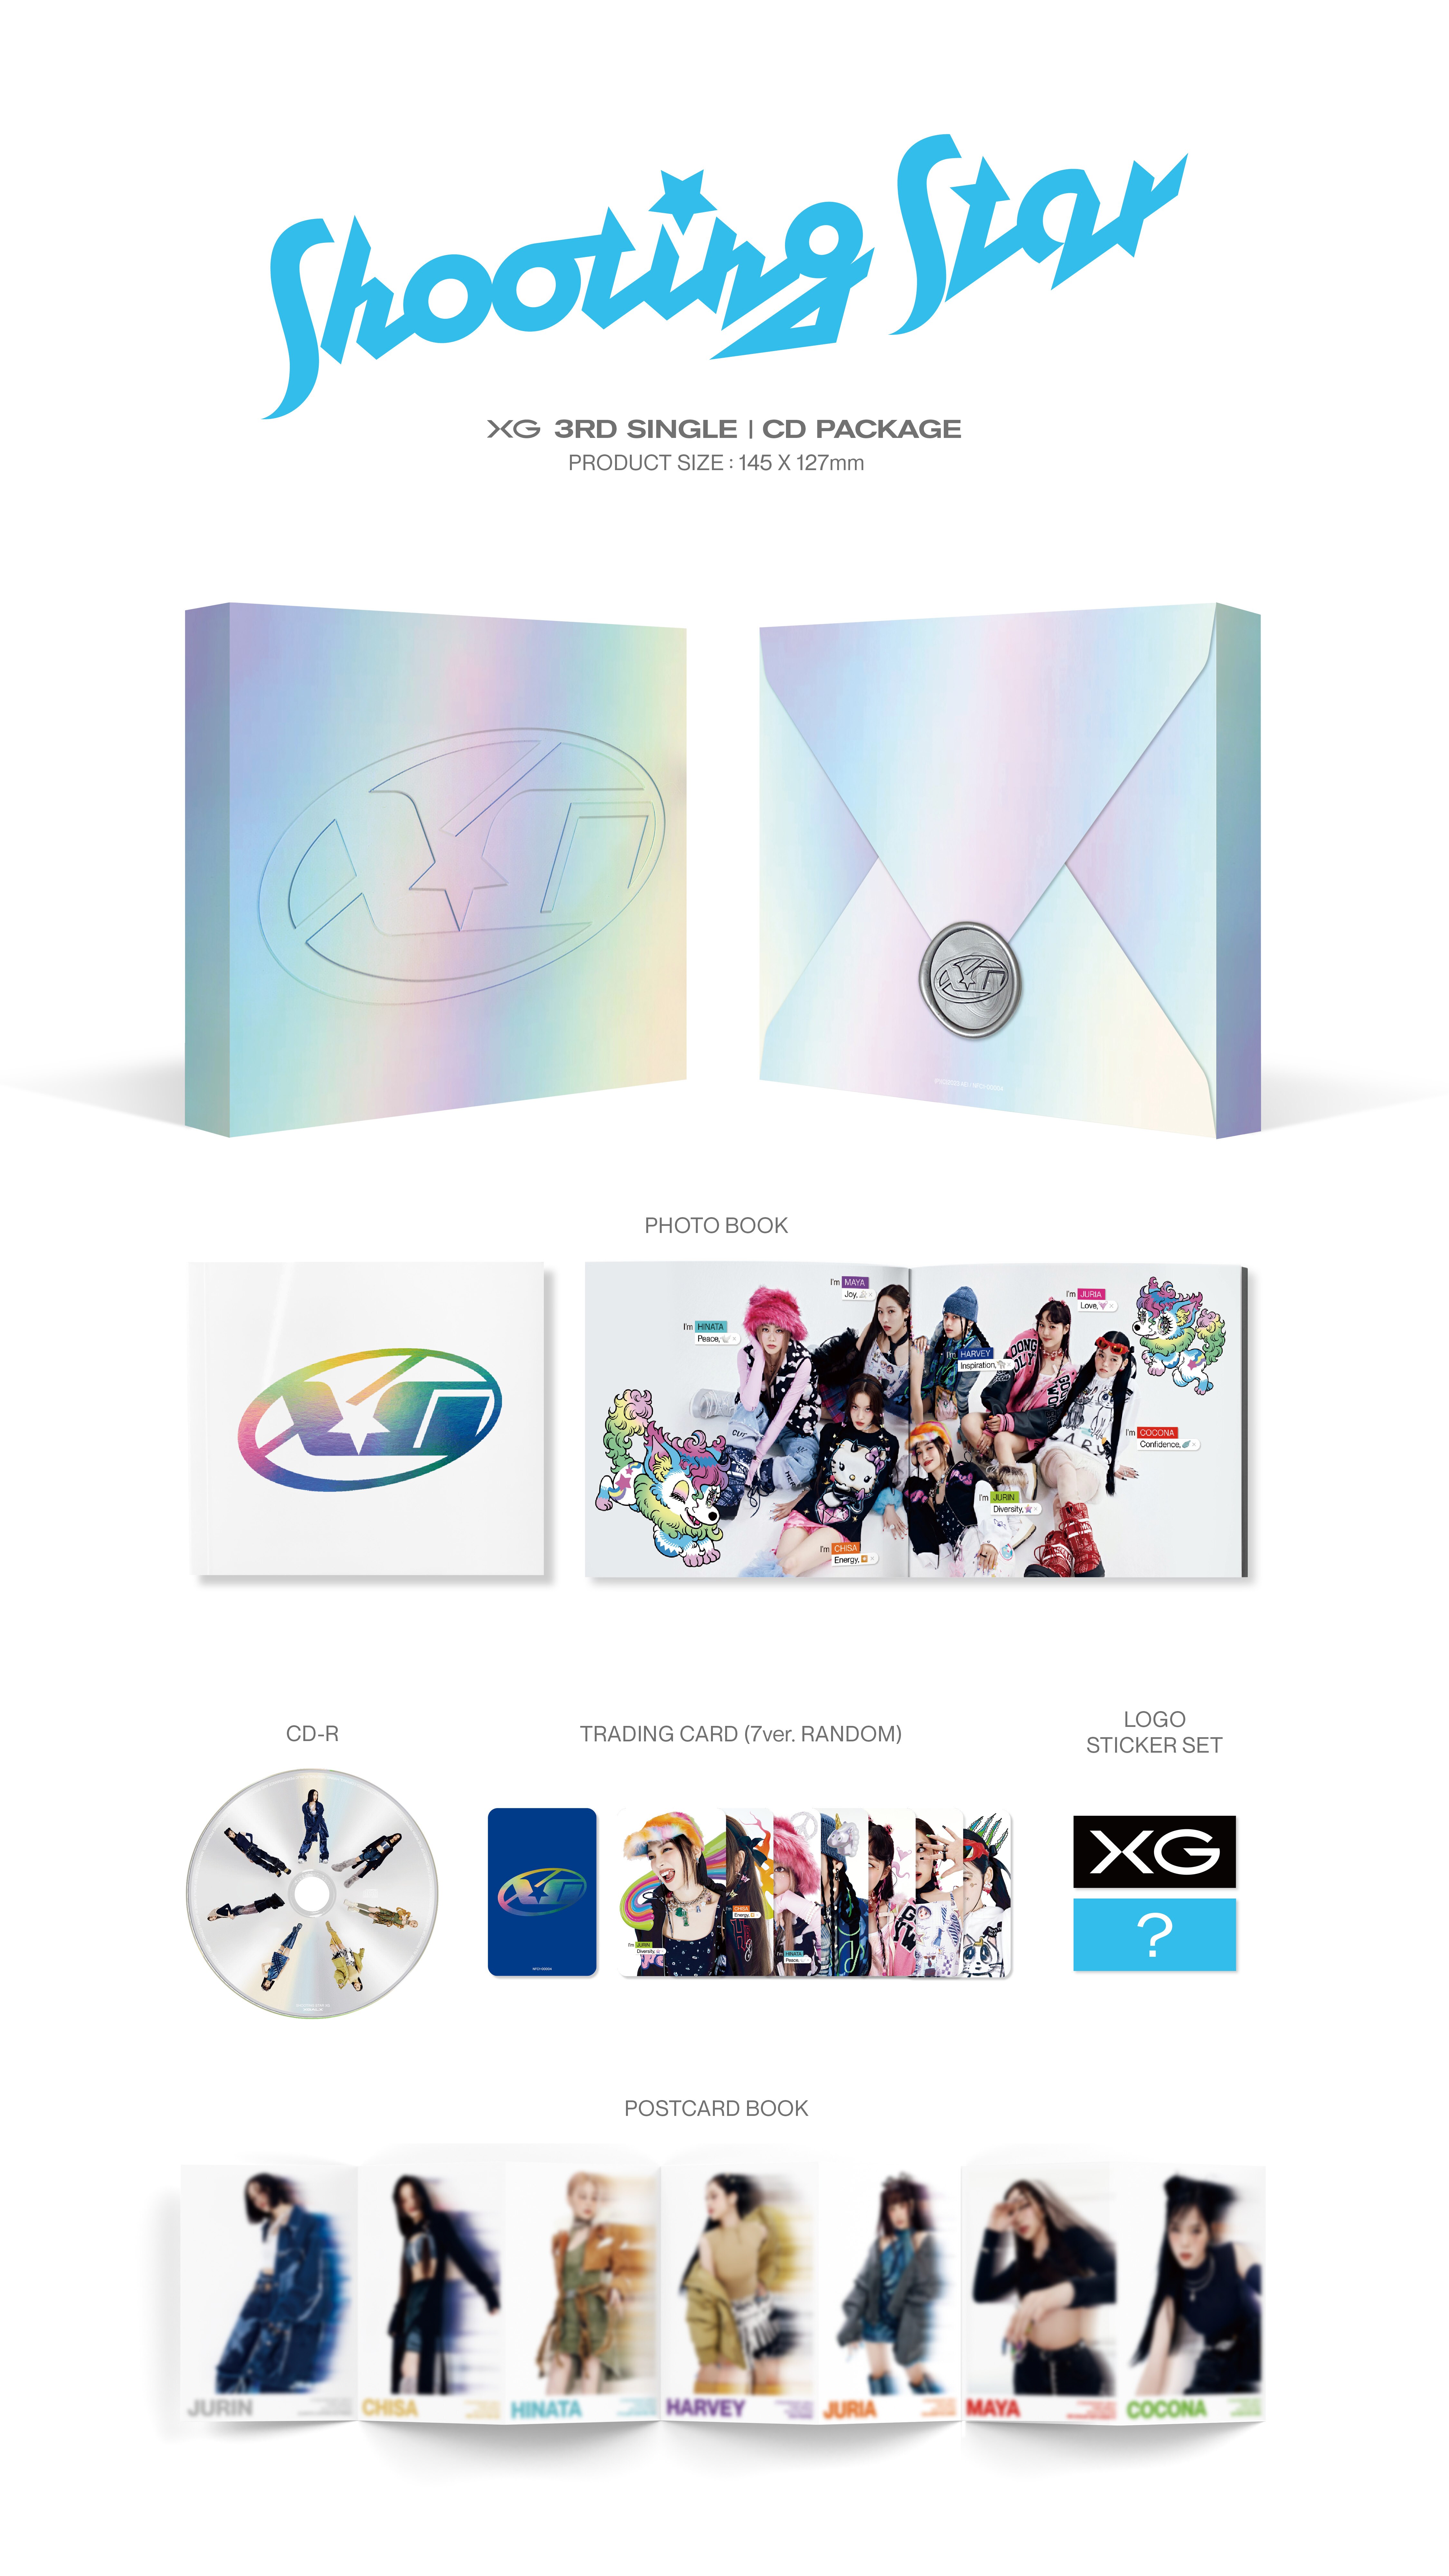 SHOOTING STAR' CD BOX sets are now available! - NEWS | XG 